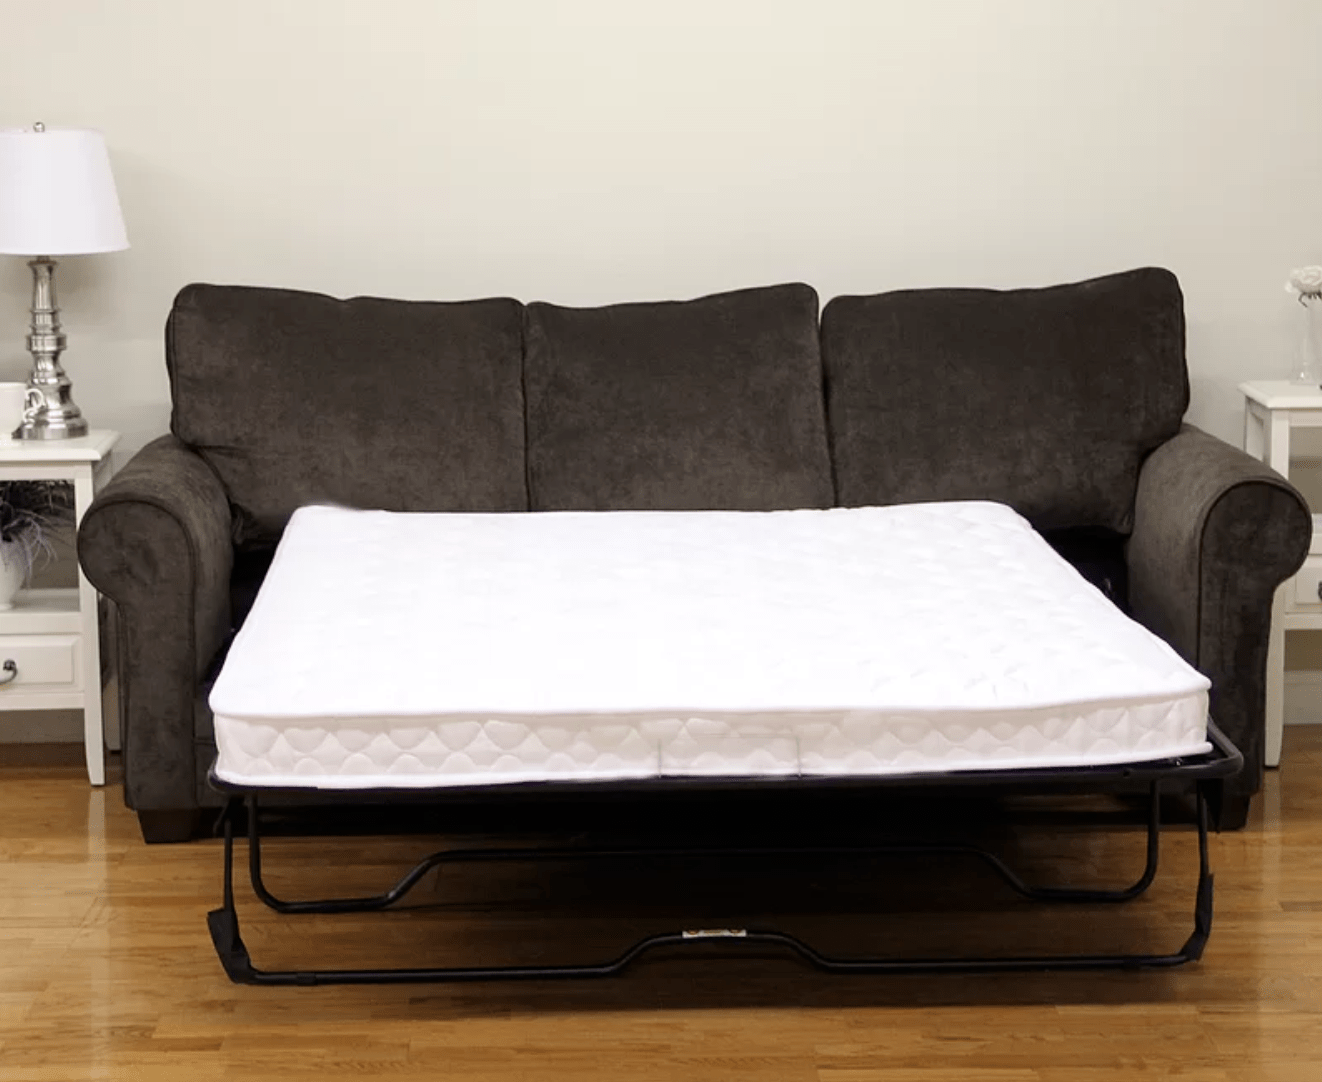 sofa bed mattress replacement sydney